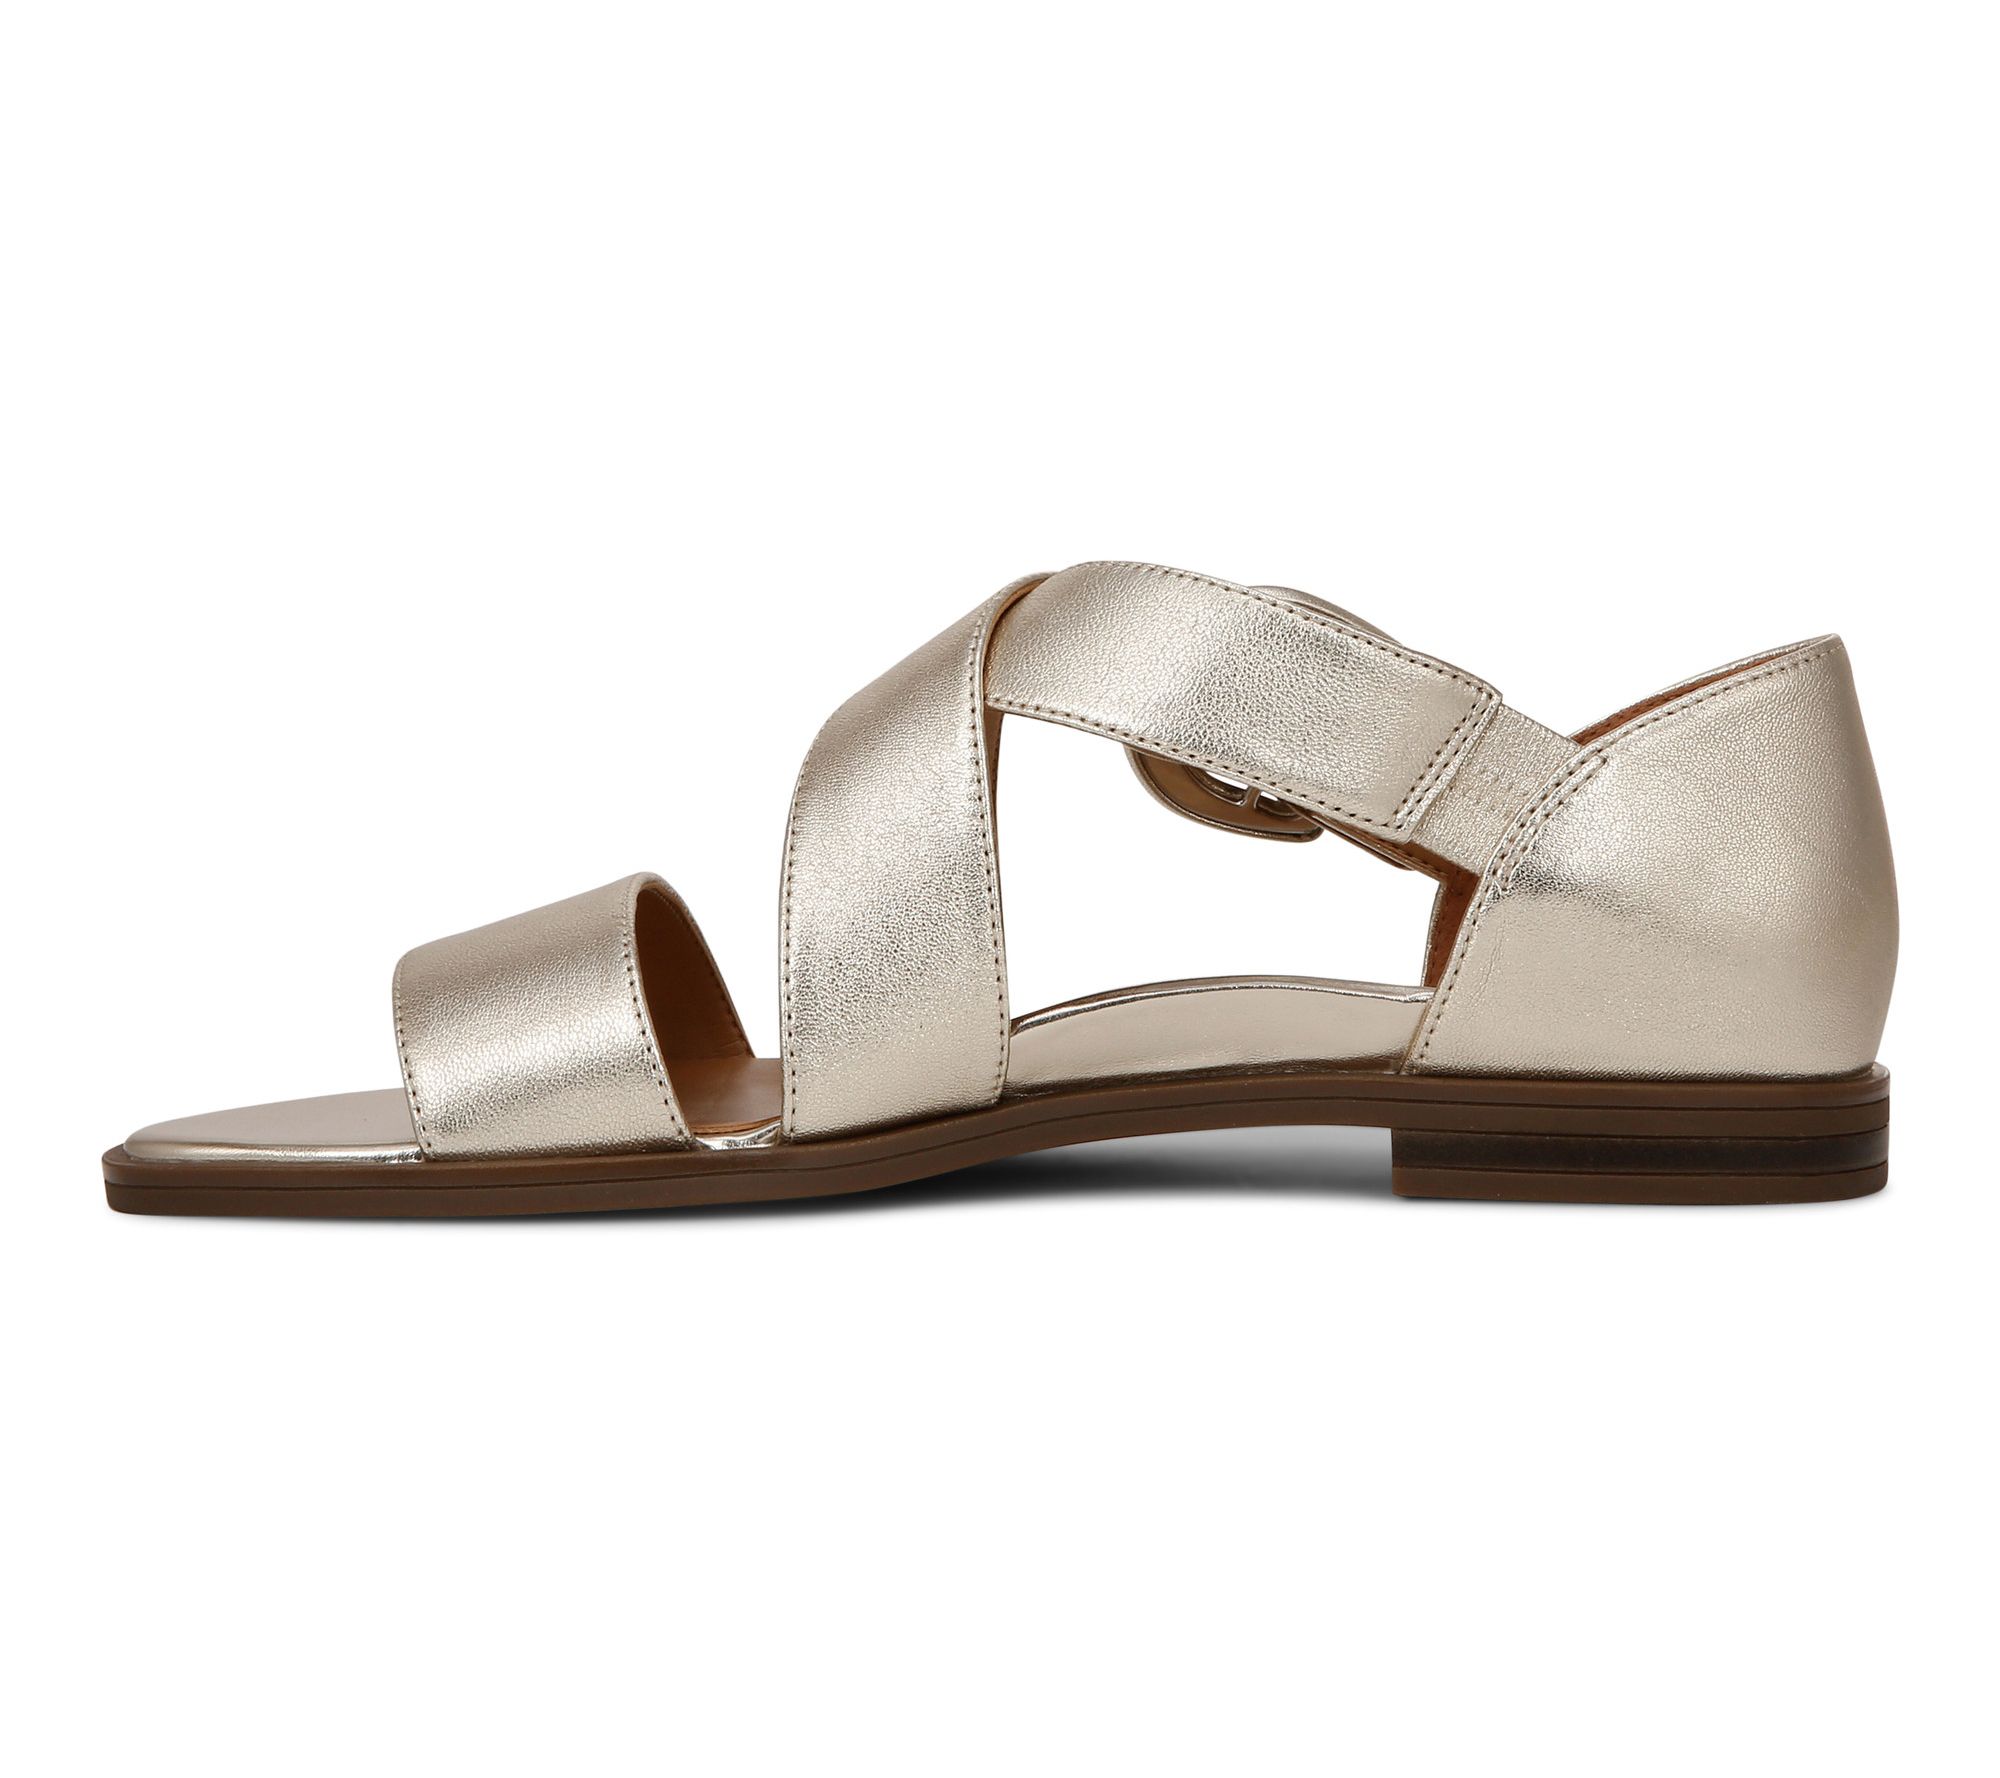 Vionic Leather Buckle Sandals - Pacifica 